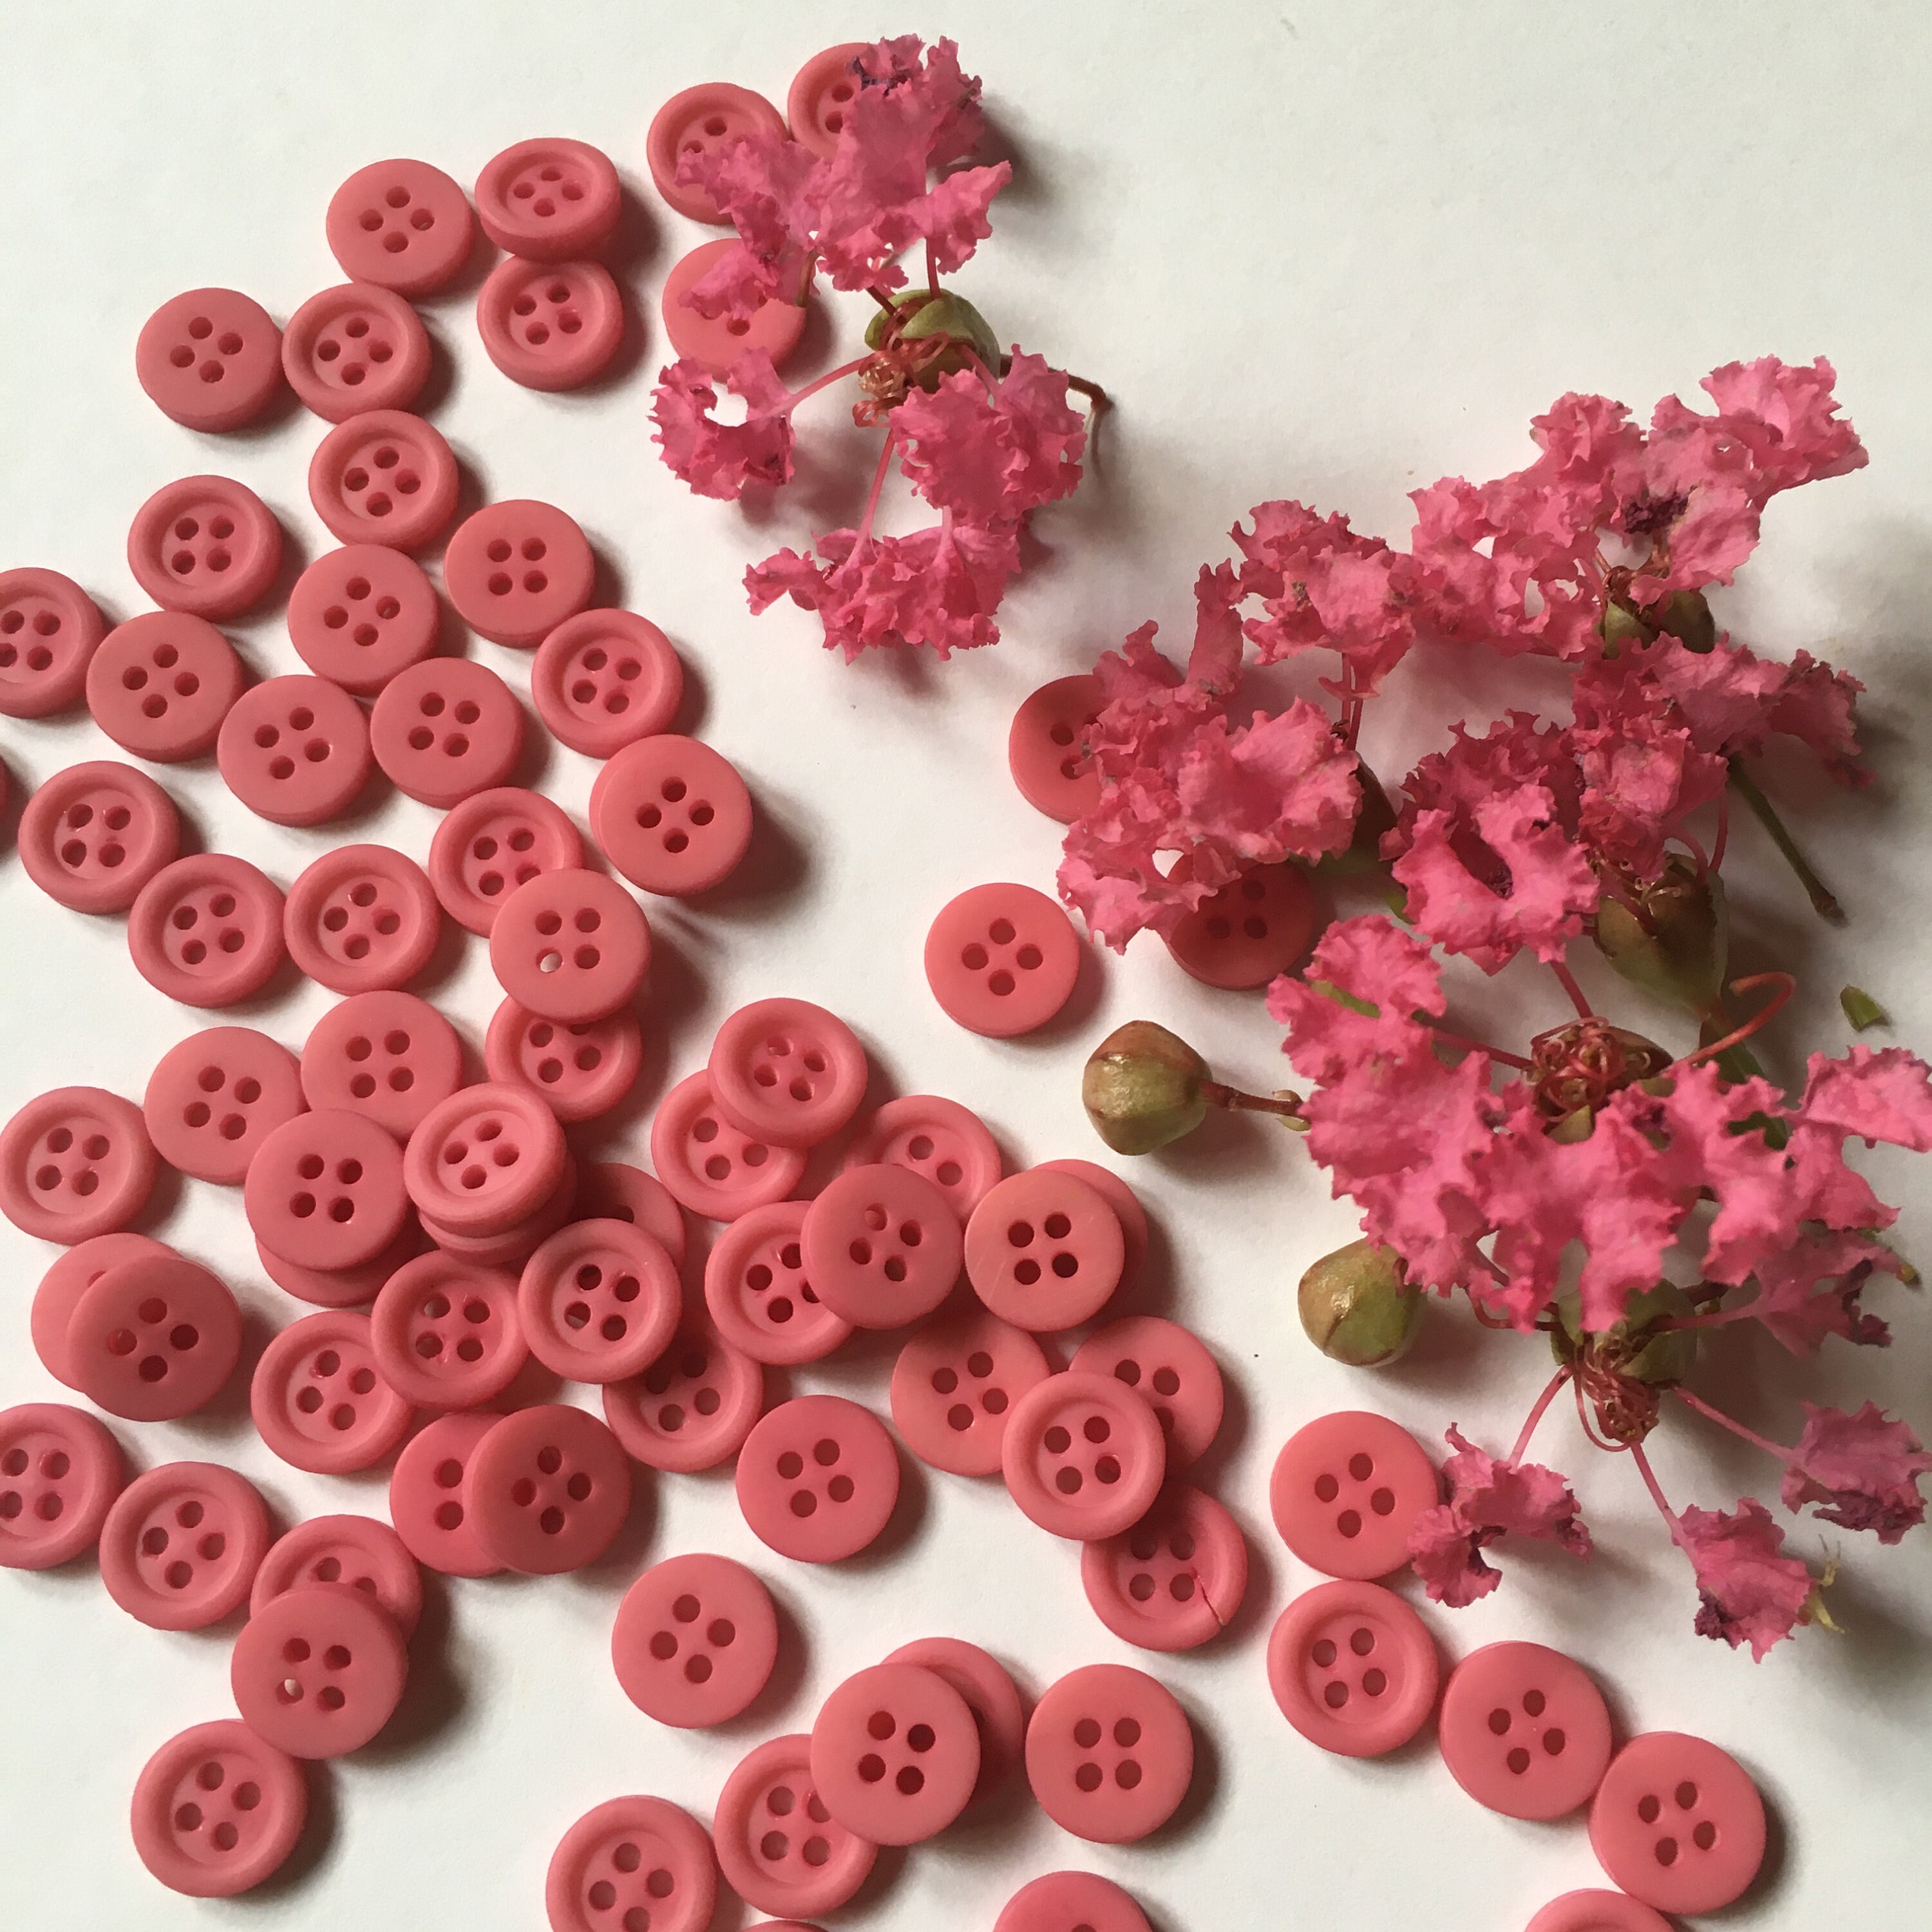 Pretty Dress Button 716 in Diameter Set of 50 Bright Pink Crape Mrytle Vintage Buttons